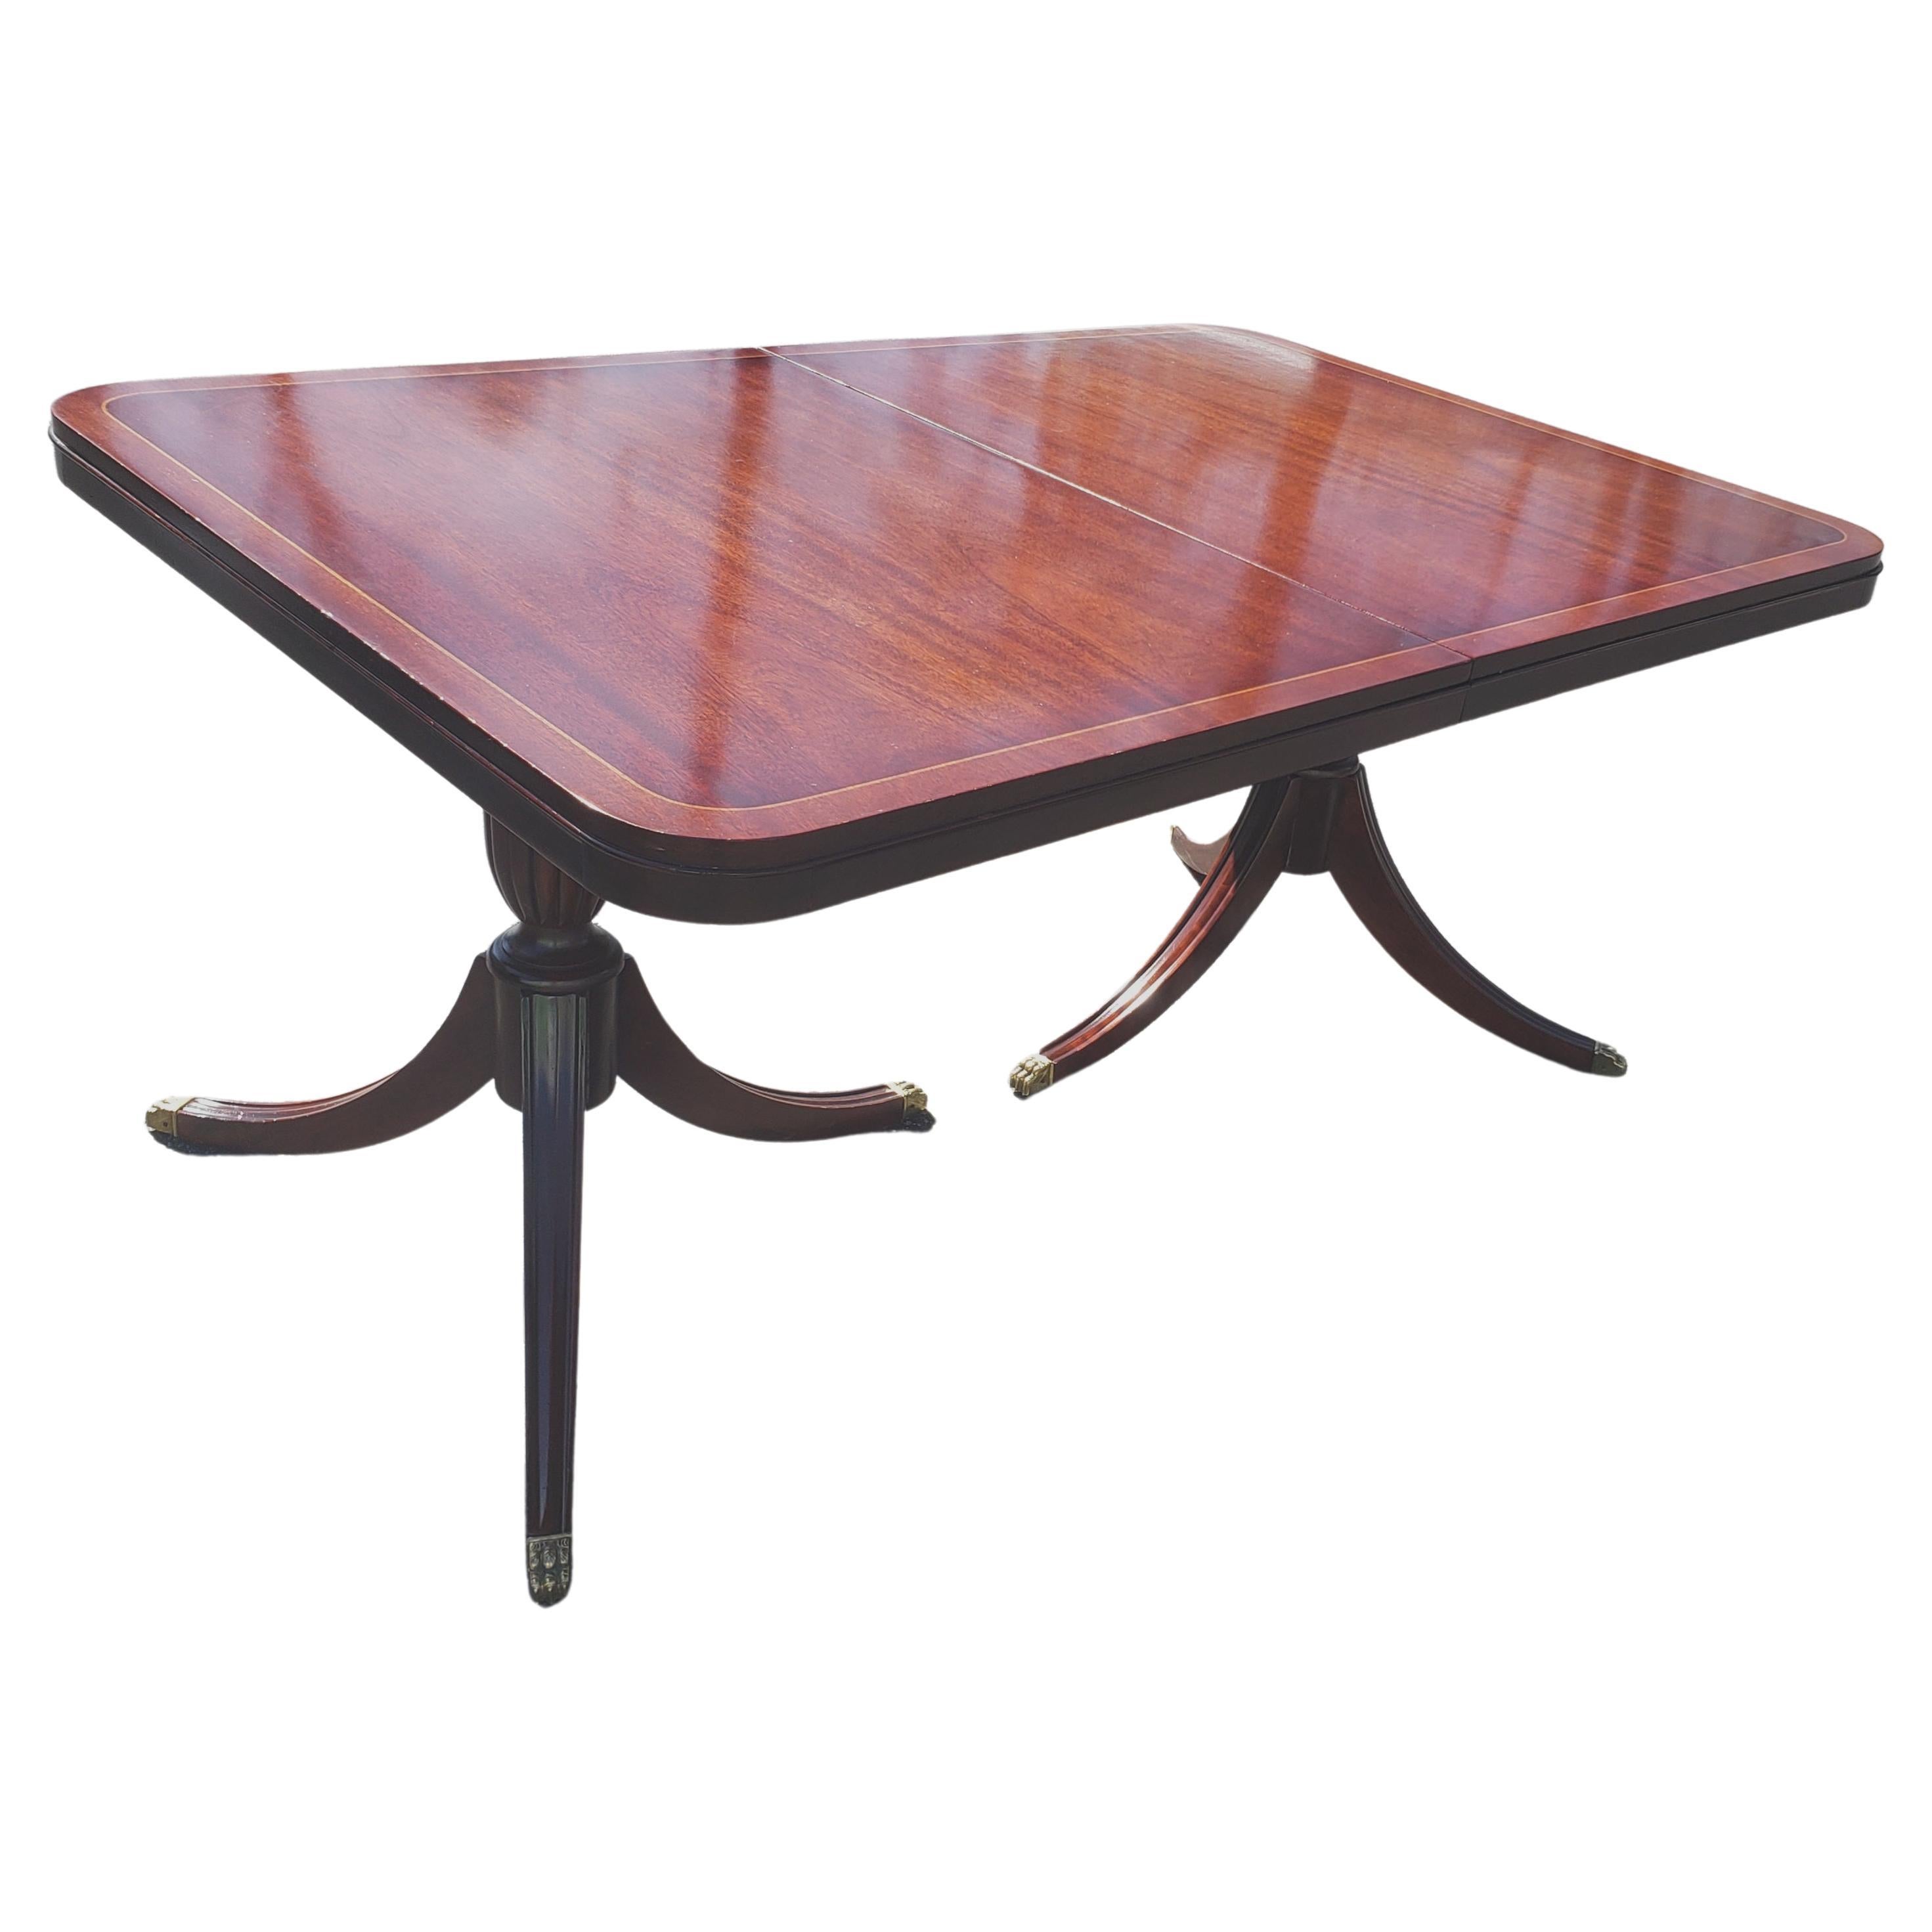 Regency Crossbanded Mahogany Satinwood Double Pedestal Extension Dining Table In Good Condition For Sale In Germantown, MD